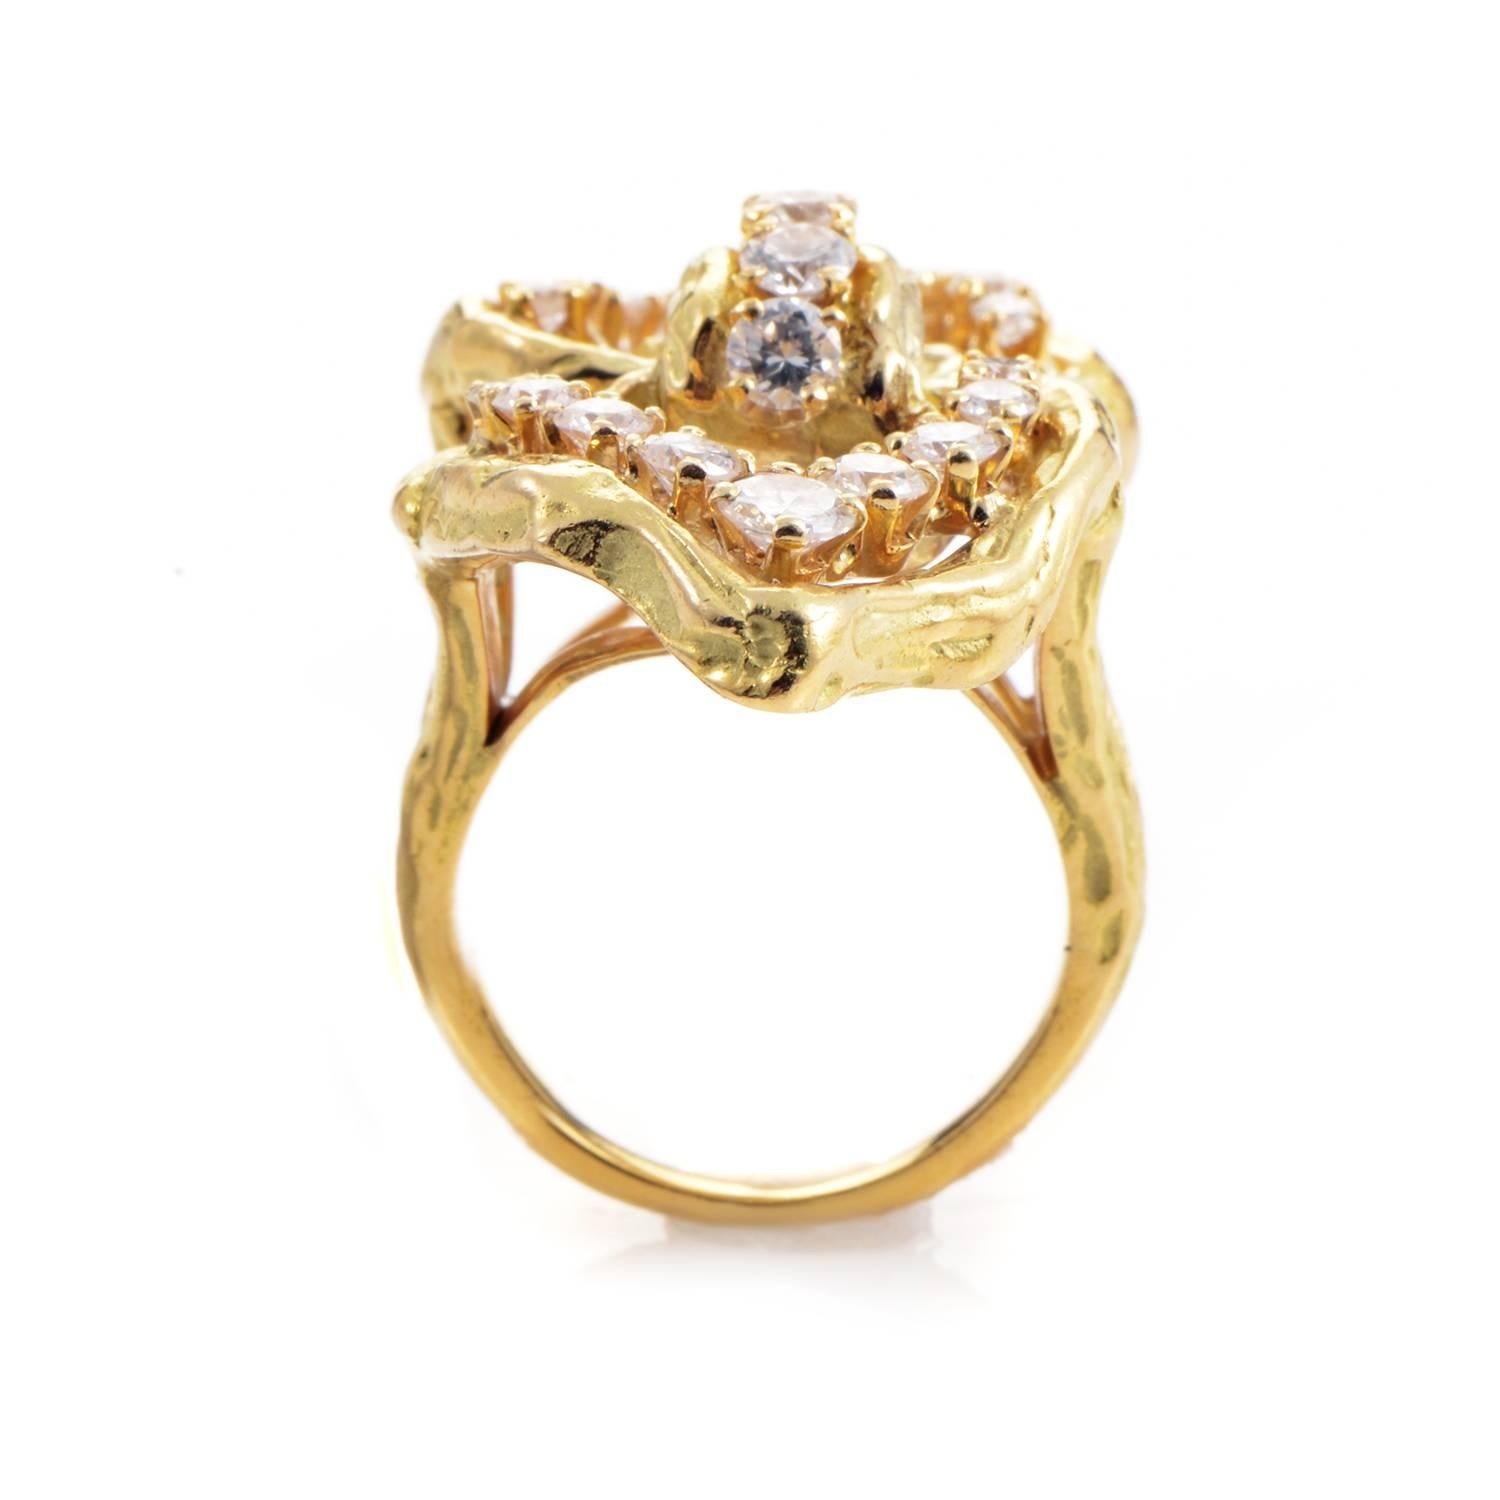 Envisioned and crafted in a marvelously unorthodox manner, the 18K yellow gold in this remarkable ring from Chaumet exudes an irresistible aura of realistic imperfection, embellished along its crooked contours with diamonds totaling 1.65